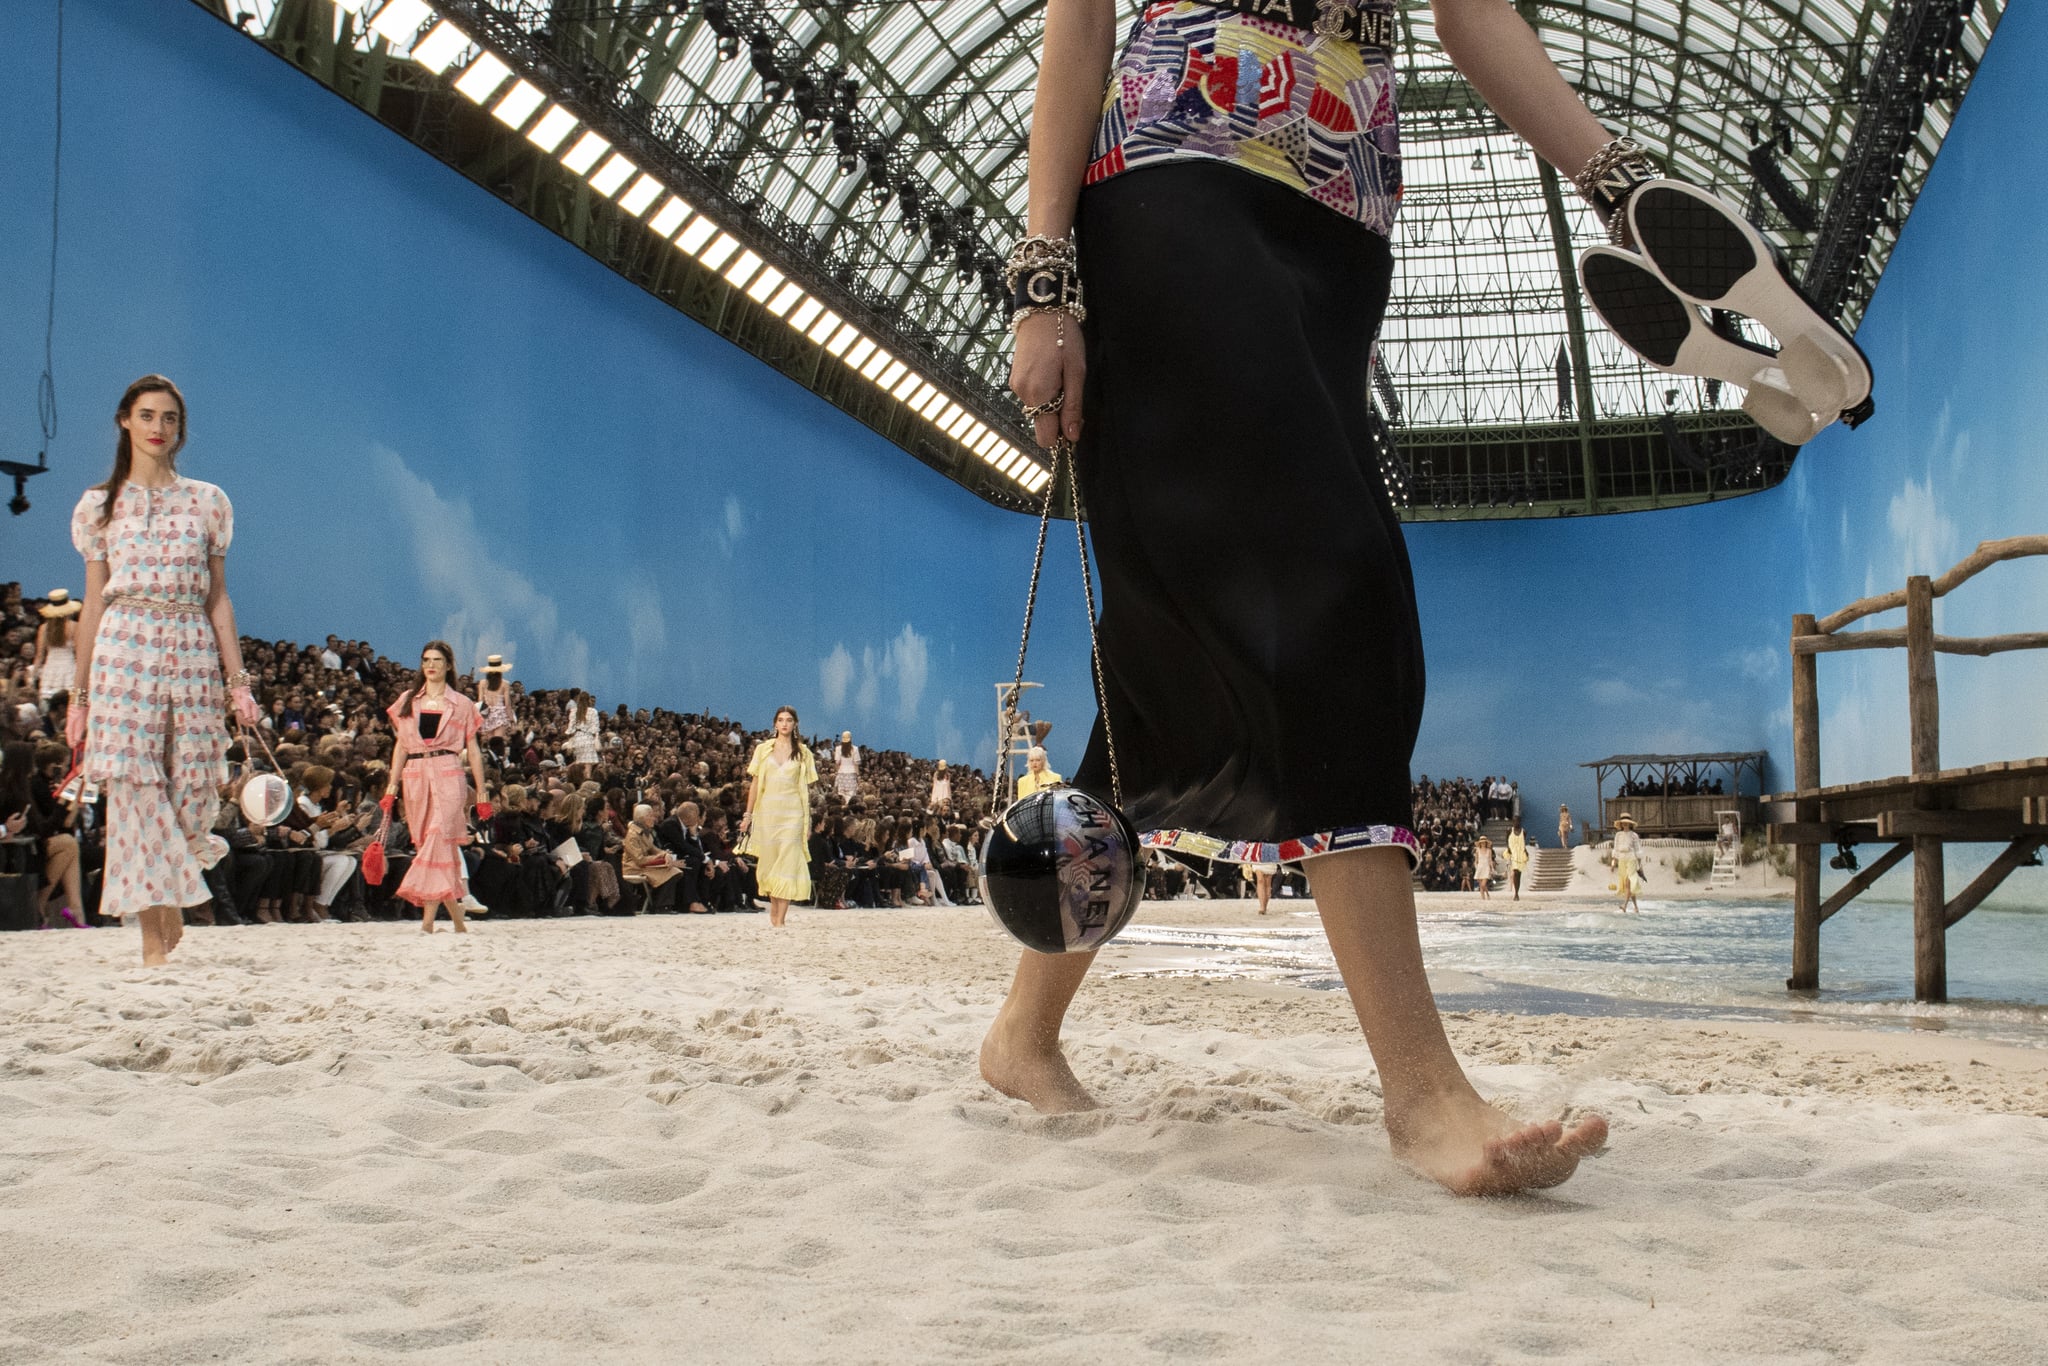 Fashion, Shopping & Style, Nothing Will Excite You Like the Chanel Beach  Ball Bag, Except Maybe the PVC Sandals